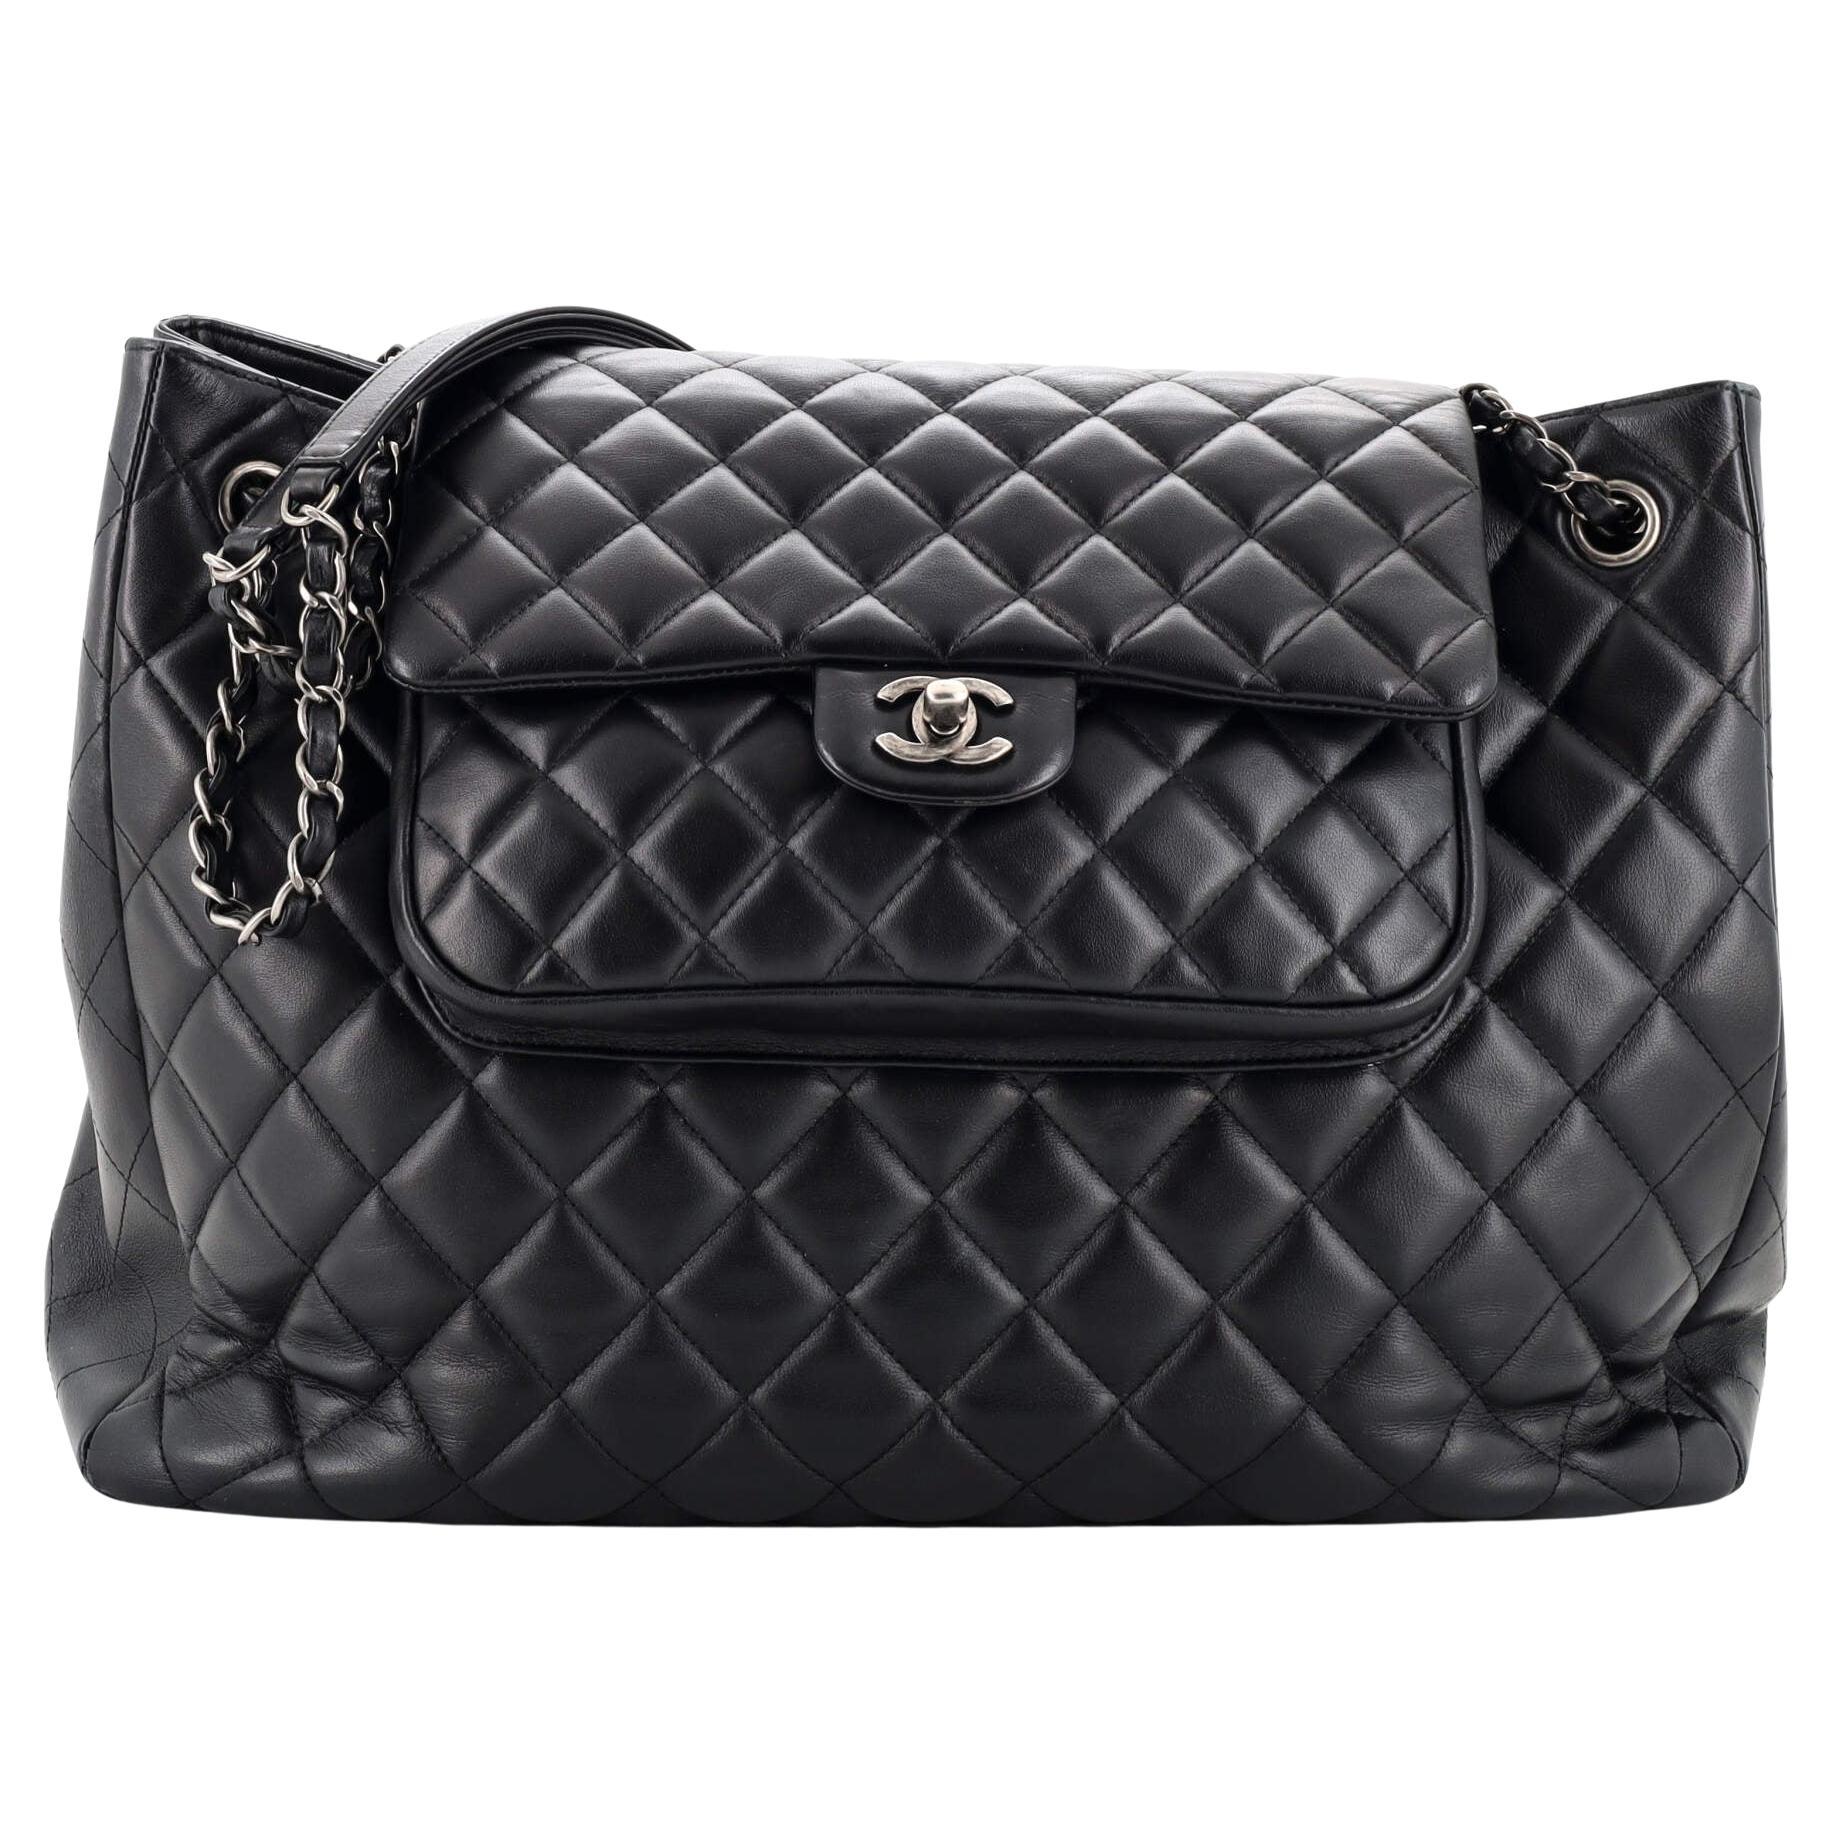 Chanel Classic Flap Shopping Tote Quilted Caviar Large